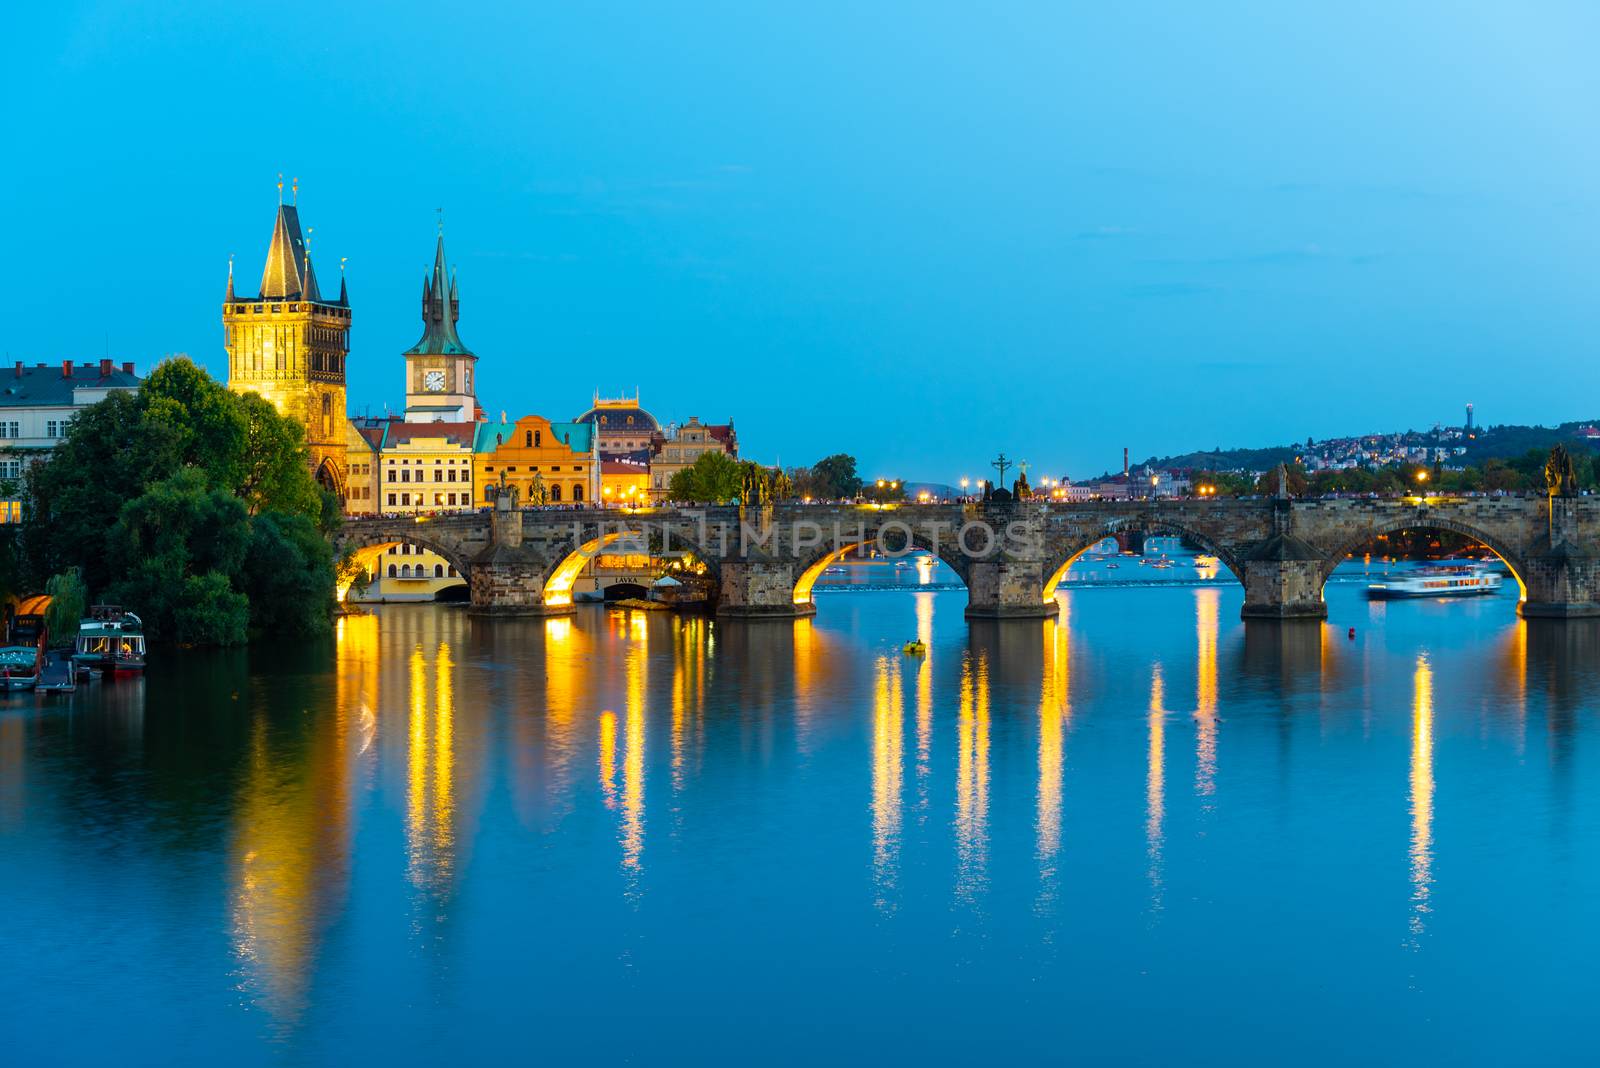 Illuminated Charles Bridge reflected in Vltava River. Evening in Prague, Czech Republic by pyty